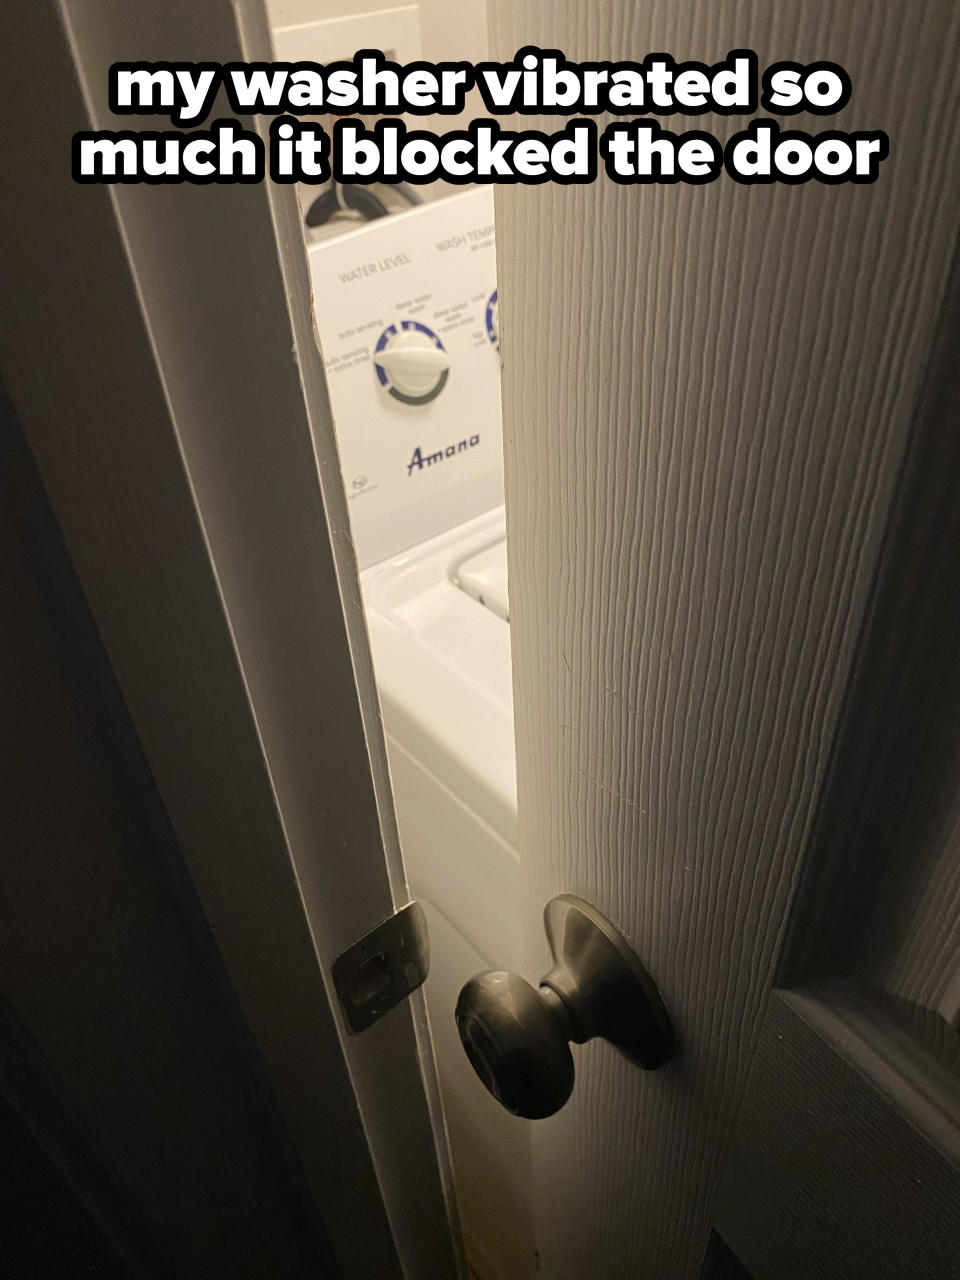 "my washer vibrated so much it blocked the door"